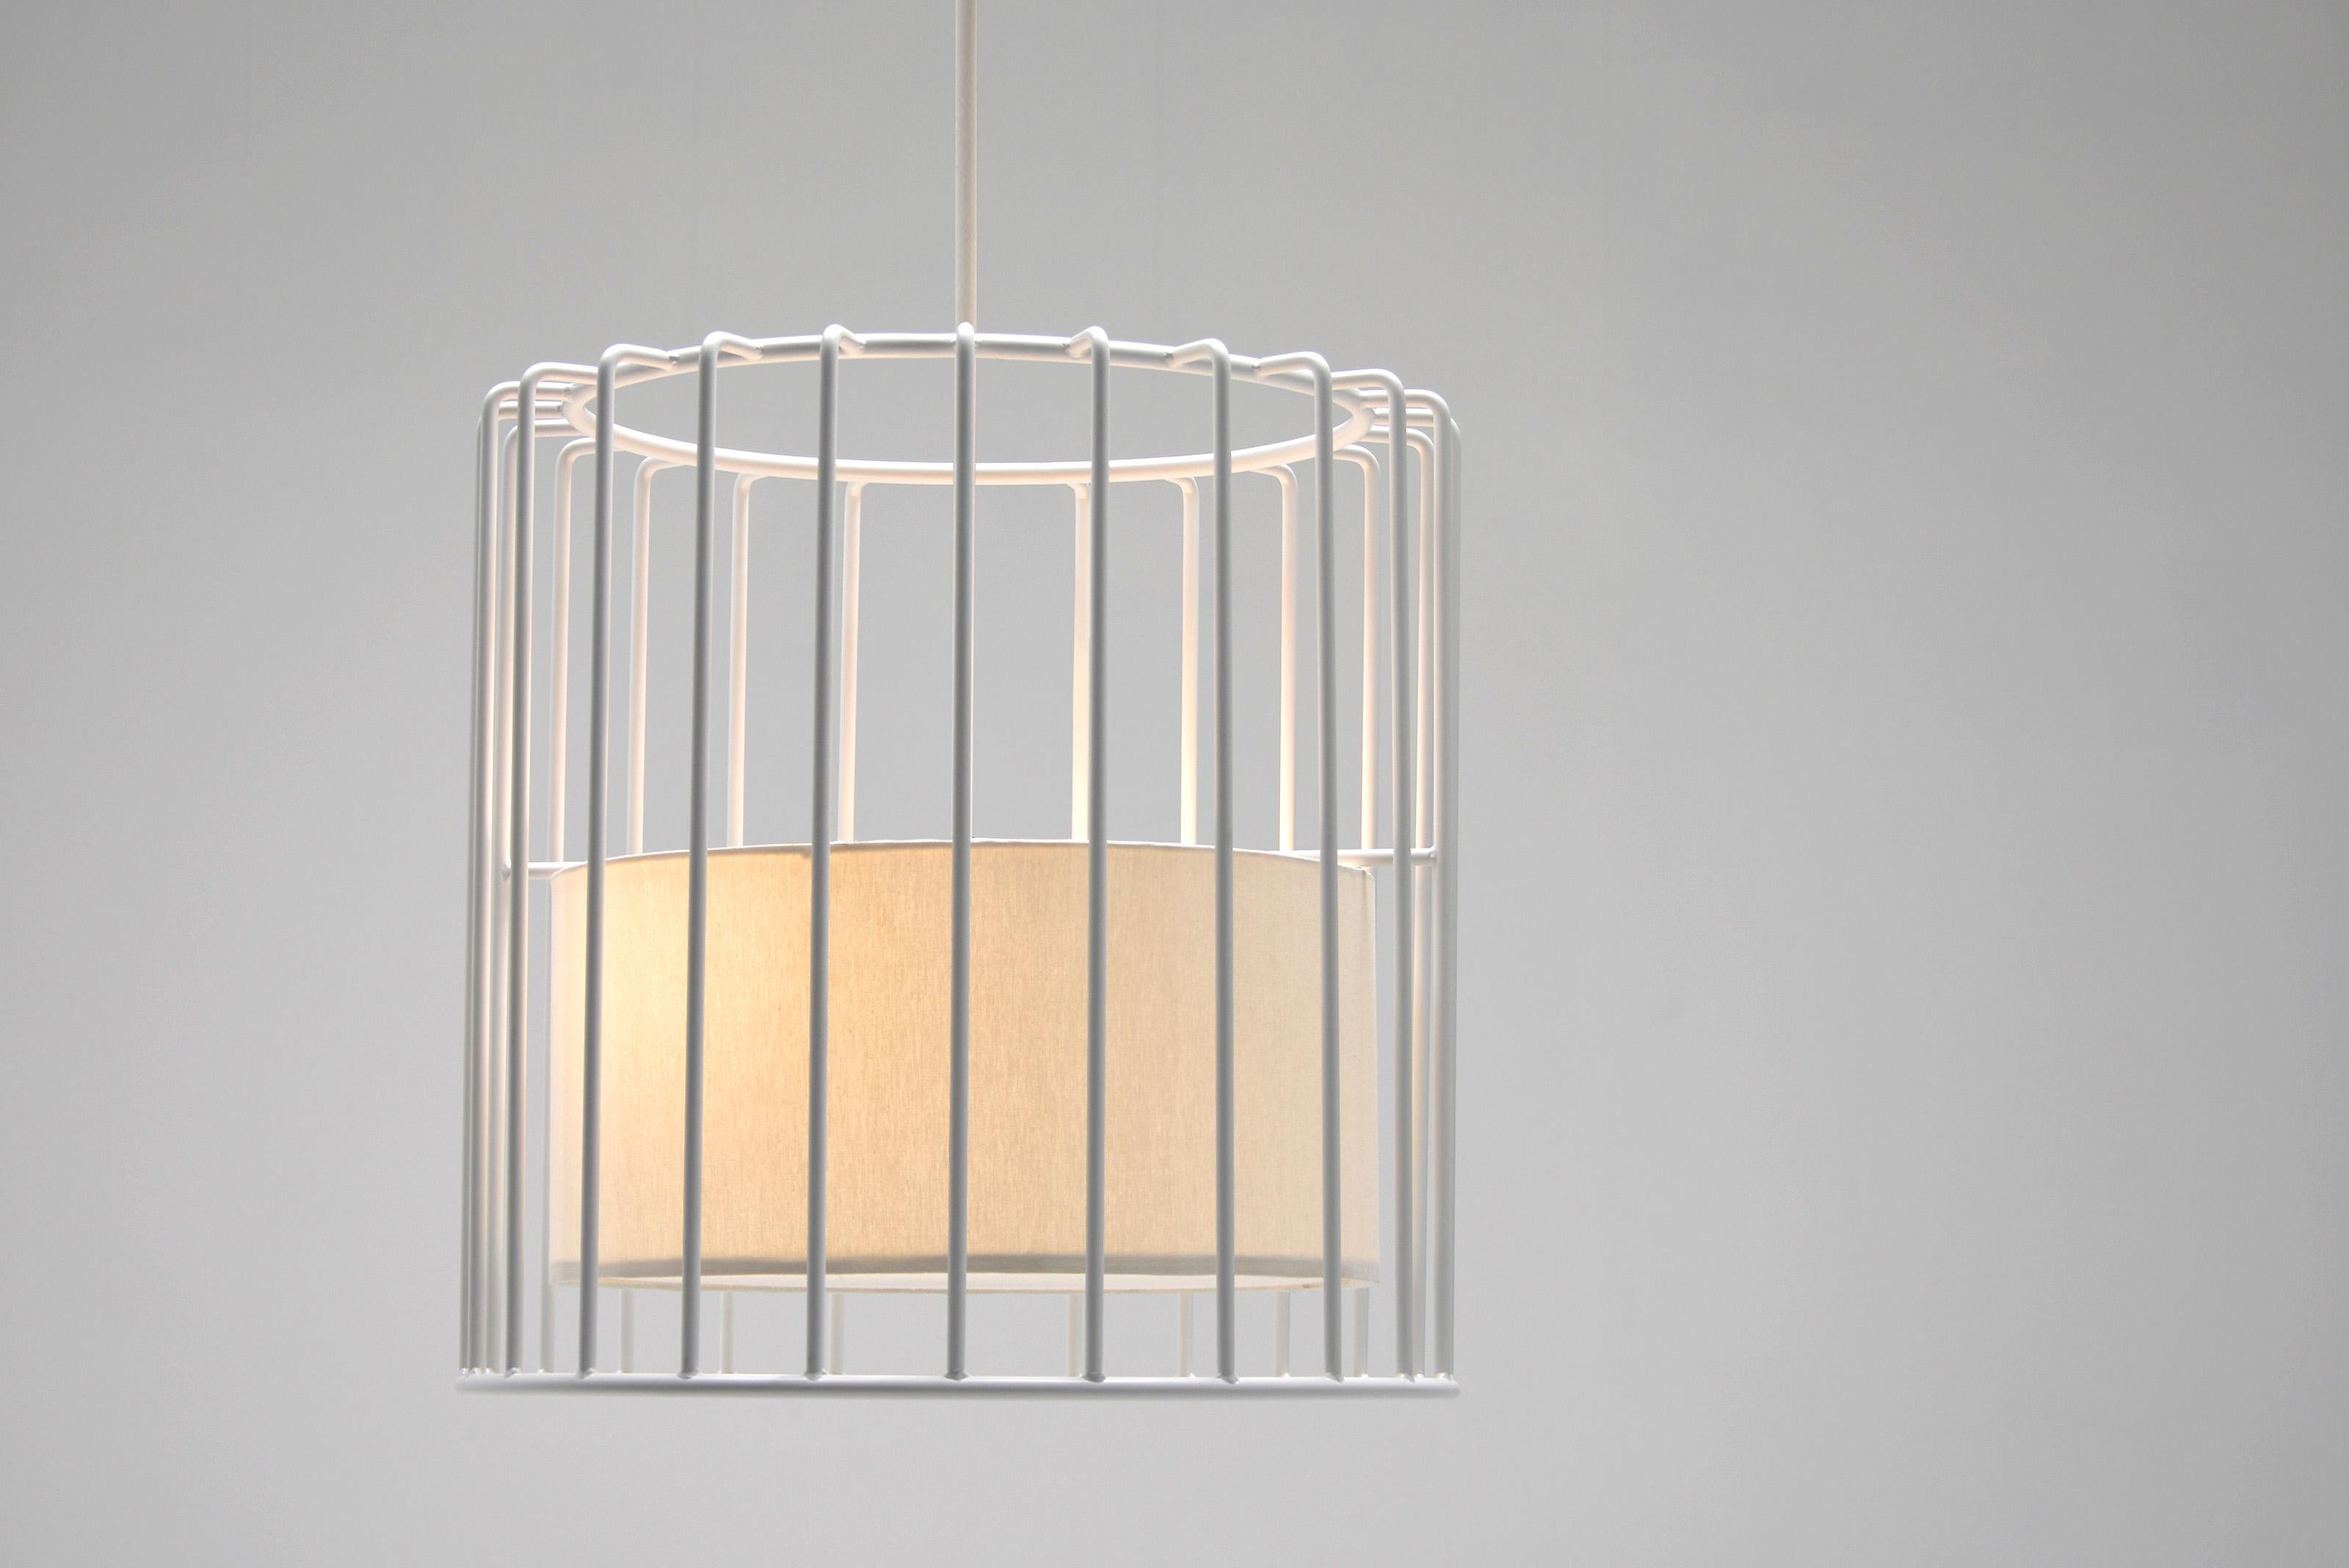 Inner Beauty Small Chandelier by Phase Design
Dimensions: Ø 55.9 x H 55.9 cm. 
Materials: Linen and powder-coated metal. 

Solid steel bar available in a smoked brass, polished chrome, burnt copper, gloss or flat black and white powder coat. Powder